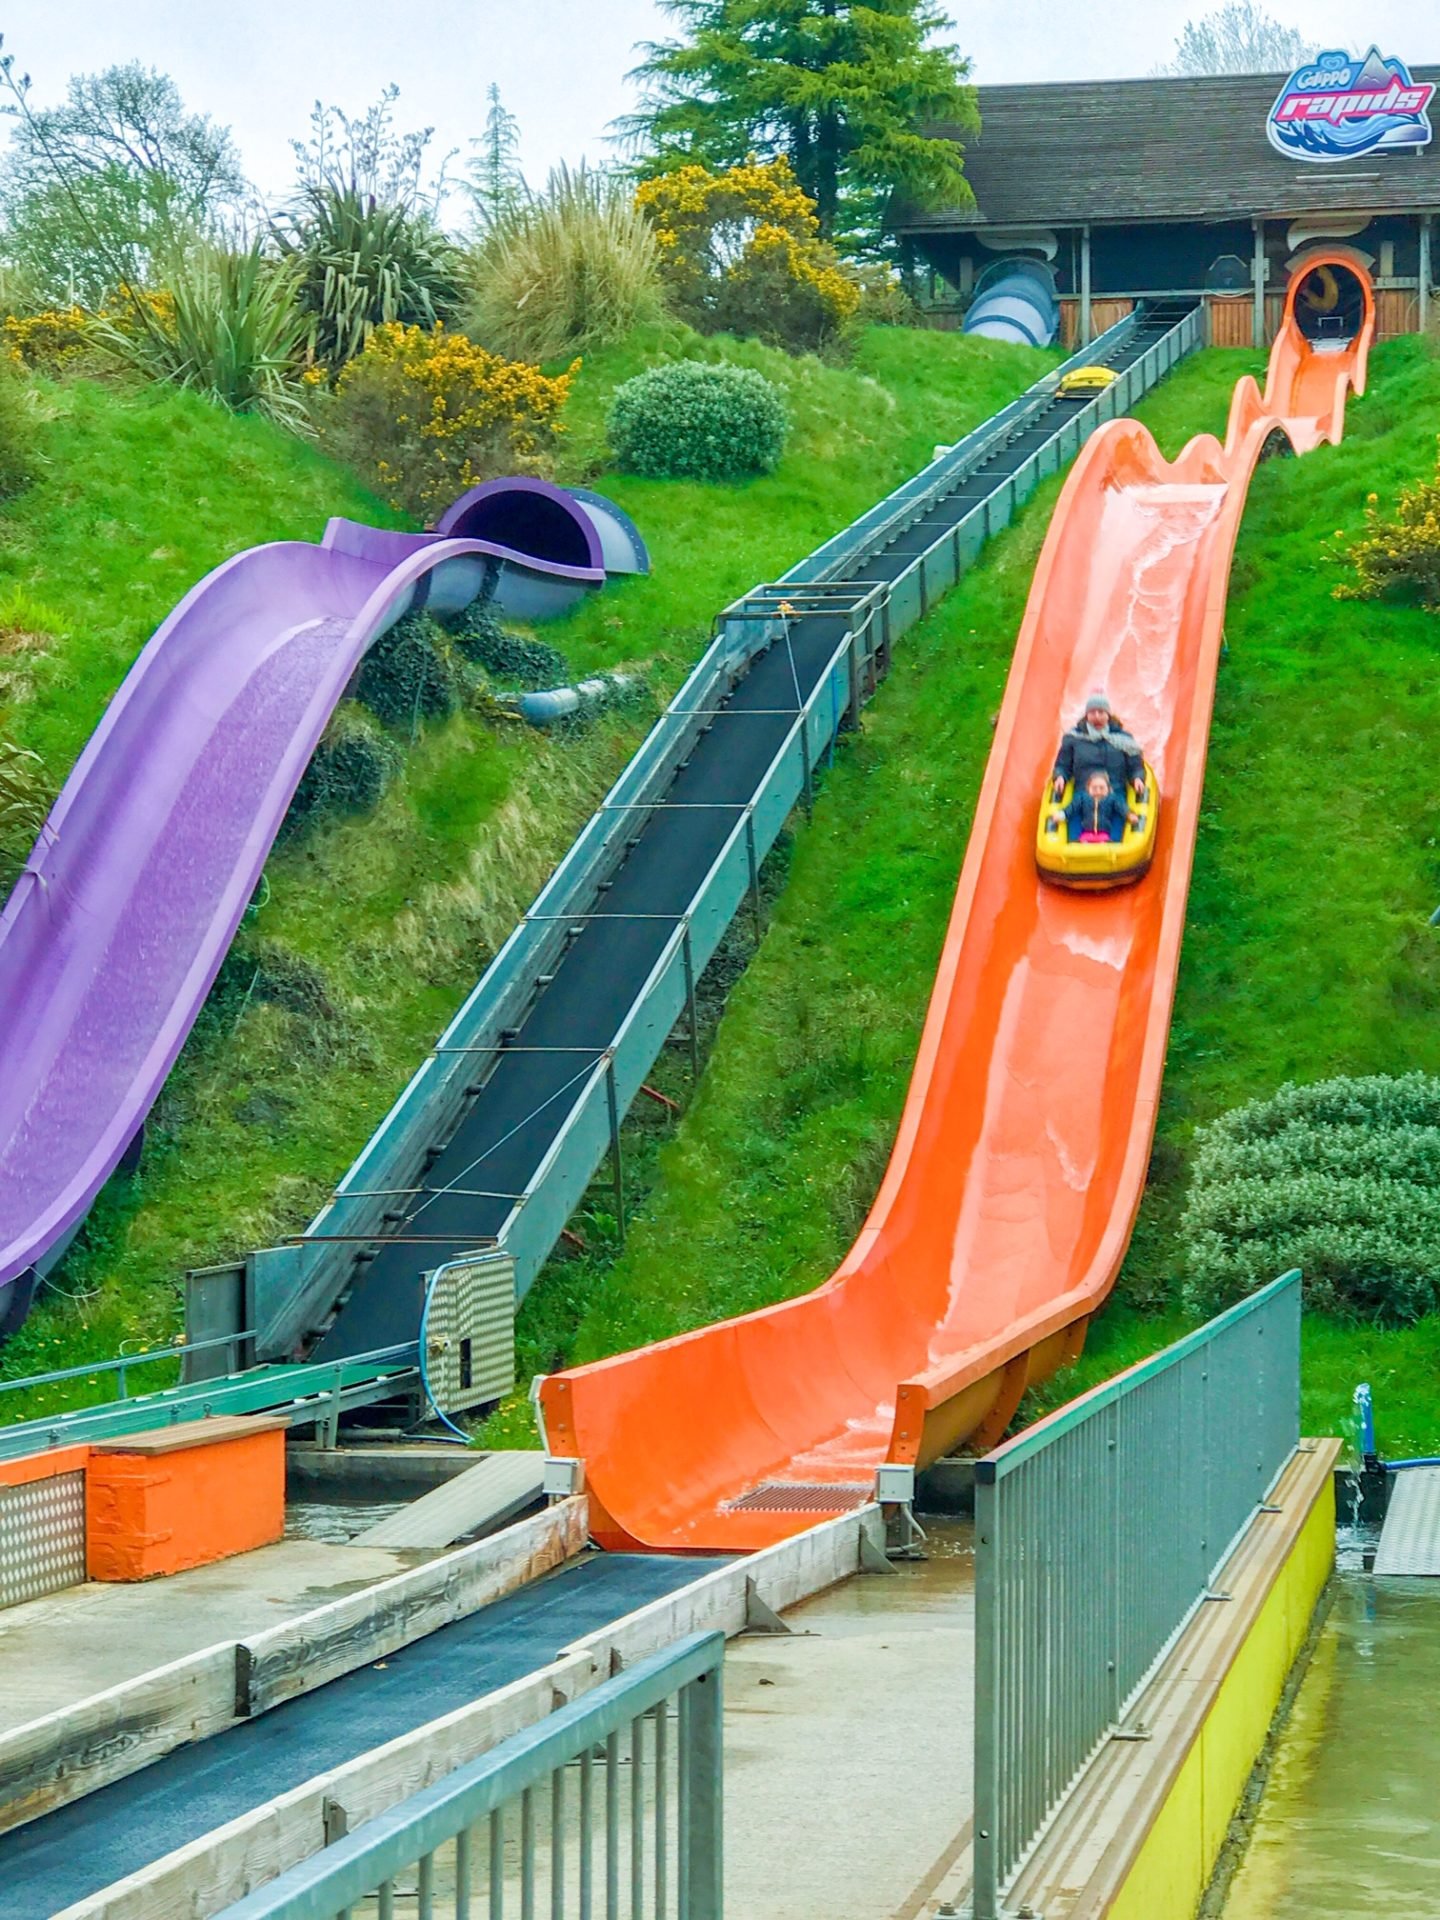 Woodlands family theme park watercoaster